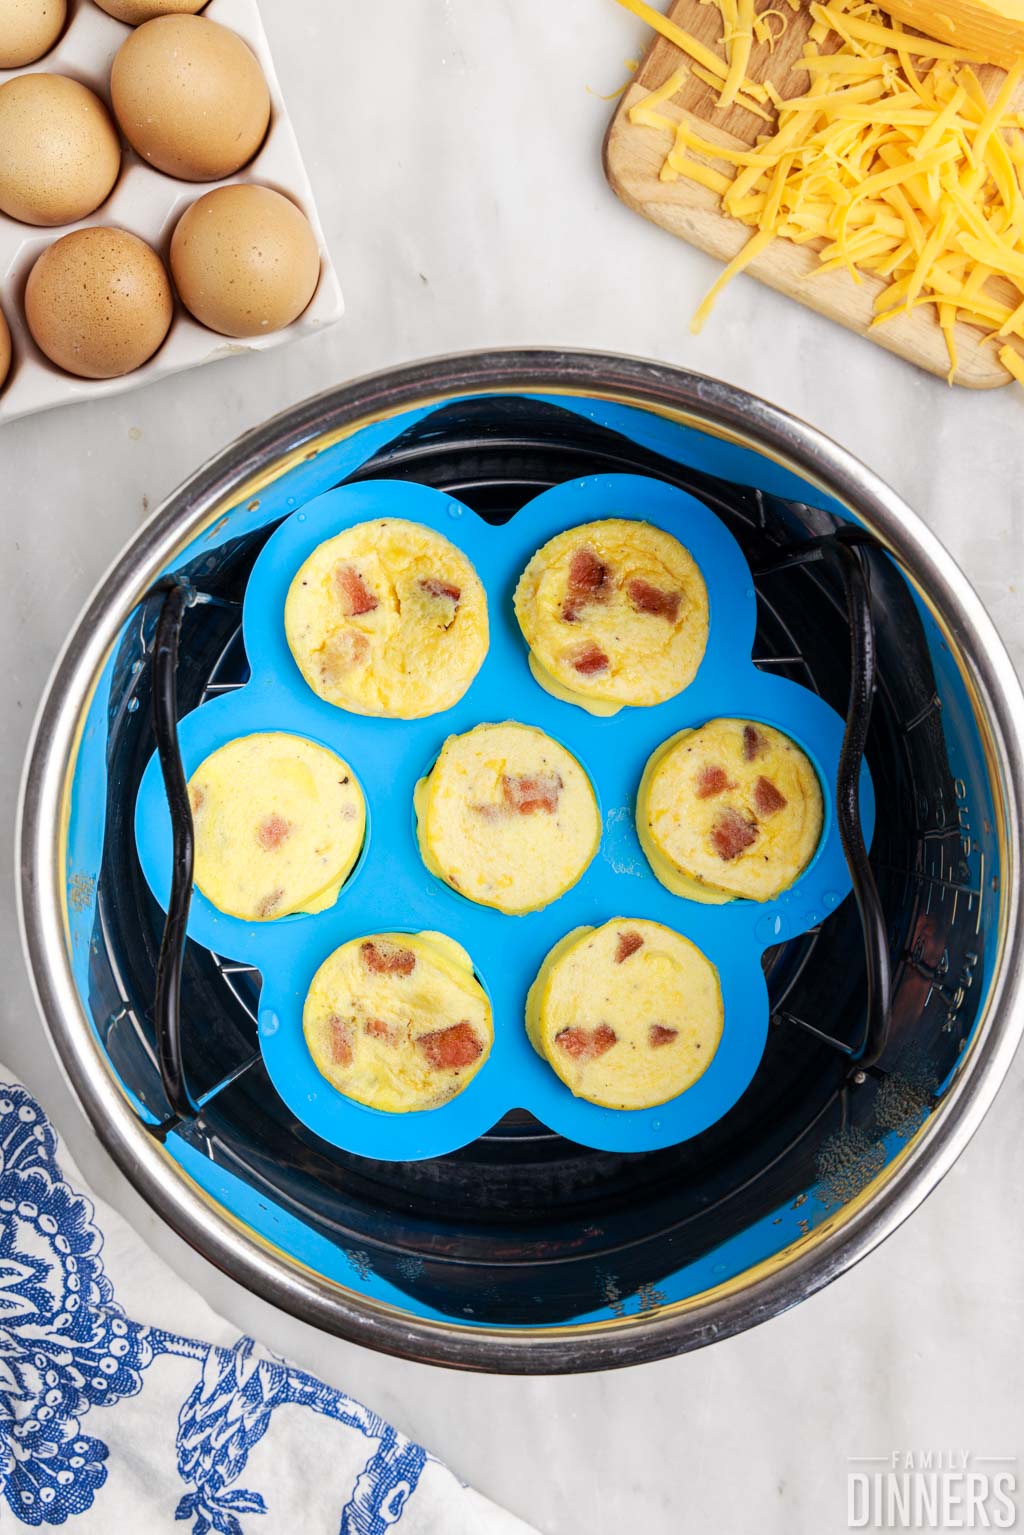 Eggs in a silicone mold in an instant pot.